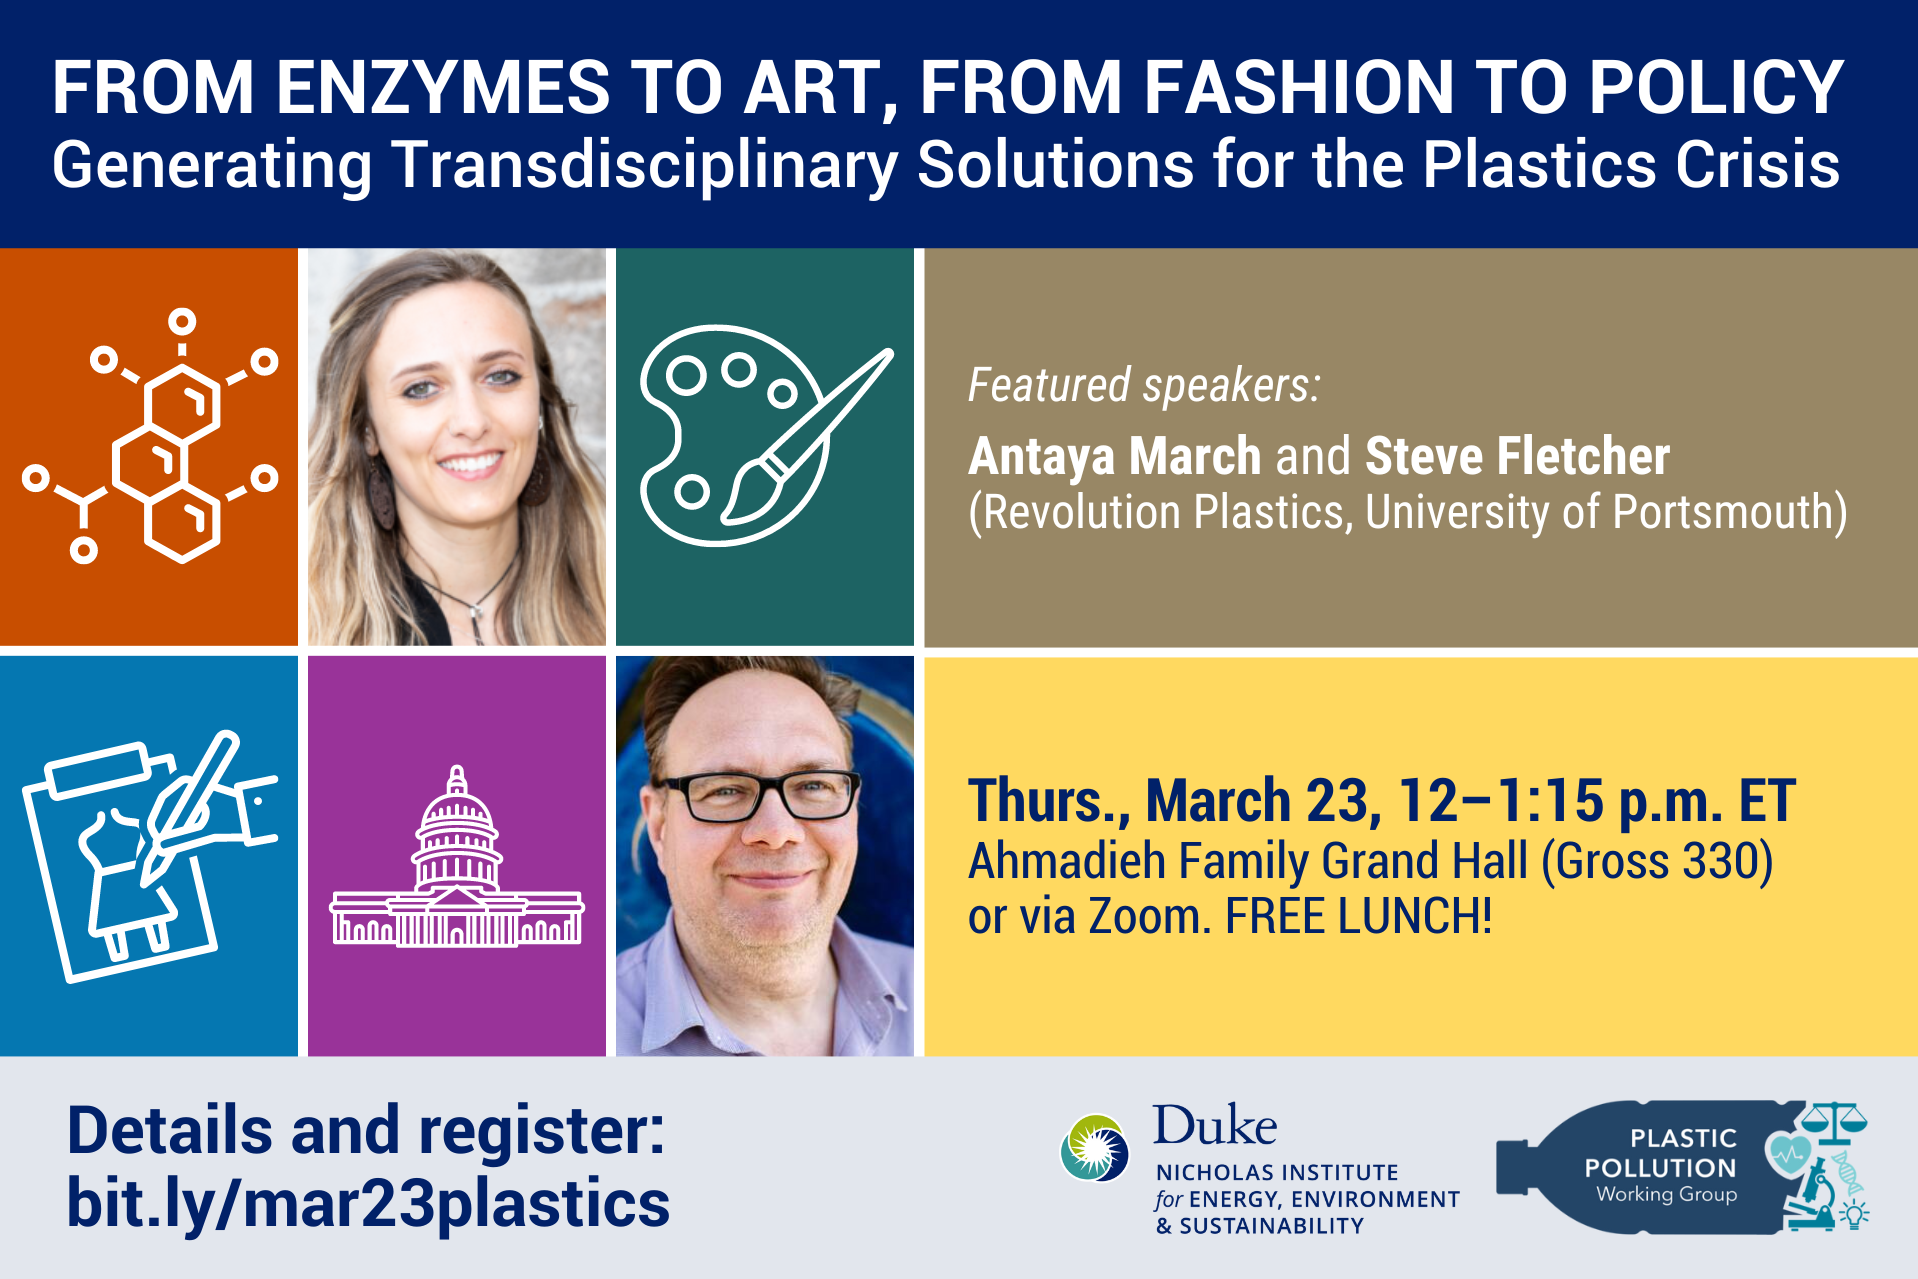 Colorful grid with (counterclockwise) enzyme icon, Antaya March headshot, paint pallete icon, Steve Fletcher headshot, capitol building icon, fashion design sketch icon. Text: &amp;amp;quot;From Enzymes to Art, From Fashion to Policy: Generating Transdisciplinary Solutions for the Plastics Crisis. Featured speakers: Antaya March and Steve Fletcher (Revolution Plastics, University of Portsmouth). Thurs., March 23, 12–1:30 p.m. ET. Ahmadieh Family Grand Hall (Gross 330) or via Zoom. Free lunch! Details and